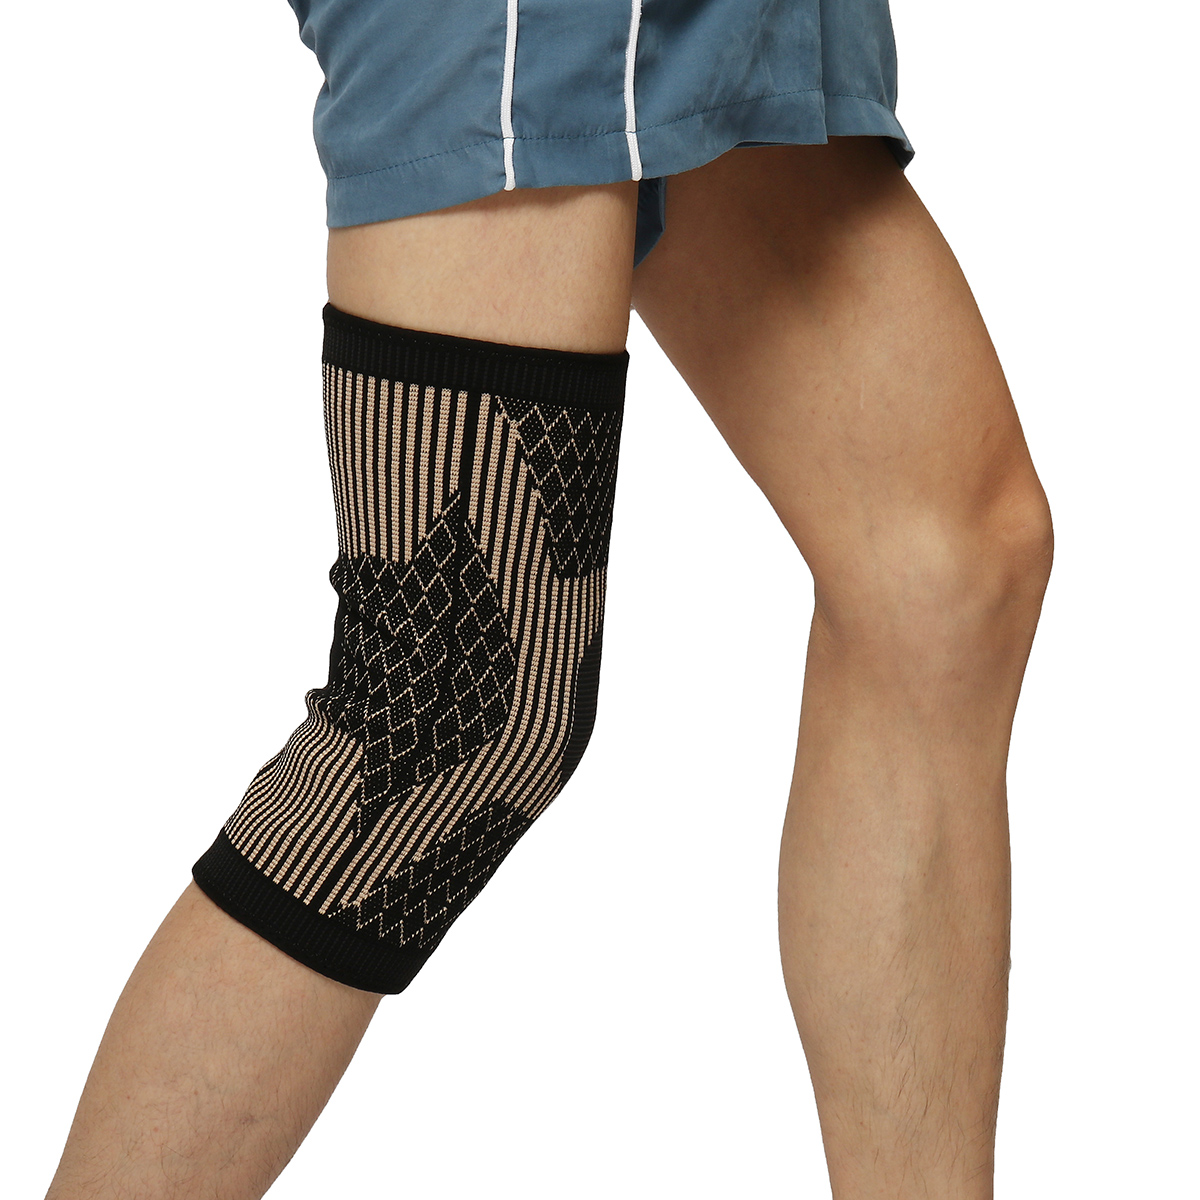 Copper-Infused-Knee-Support-Brace-Patella-Arthritis-Leg-Support-Joint-Compression-Sleeve-1537291-9